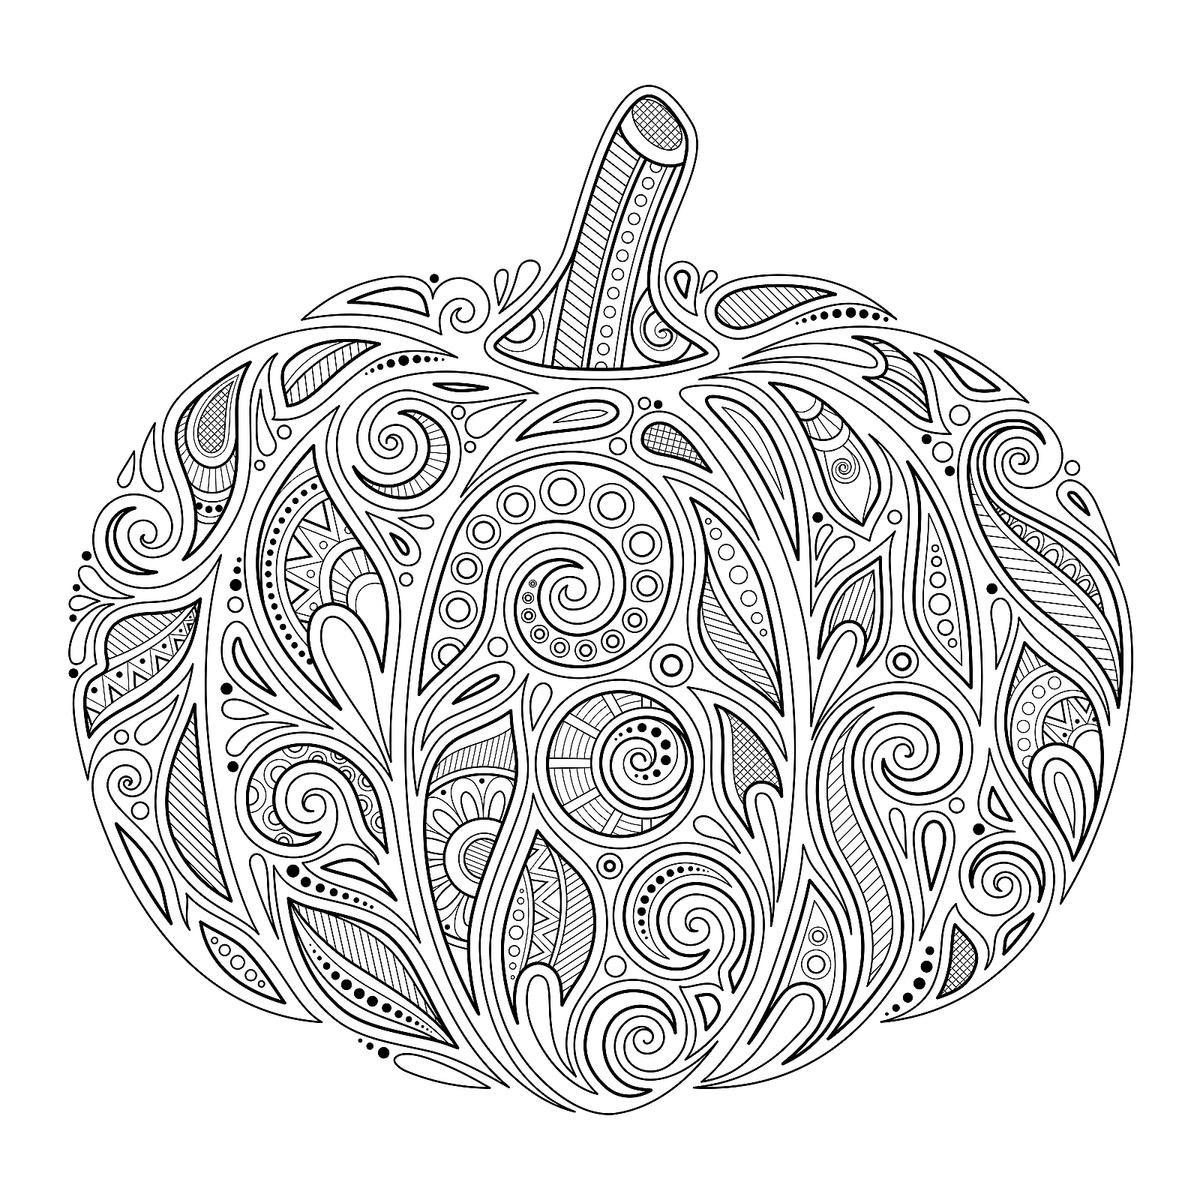 20 Free Halloween Coloring Pages for Adults in 20   Happier Human